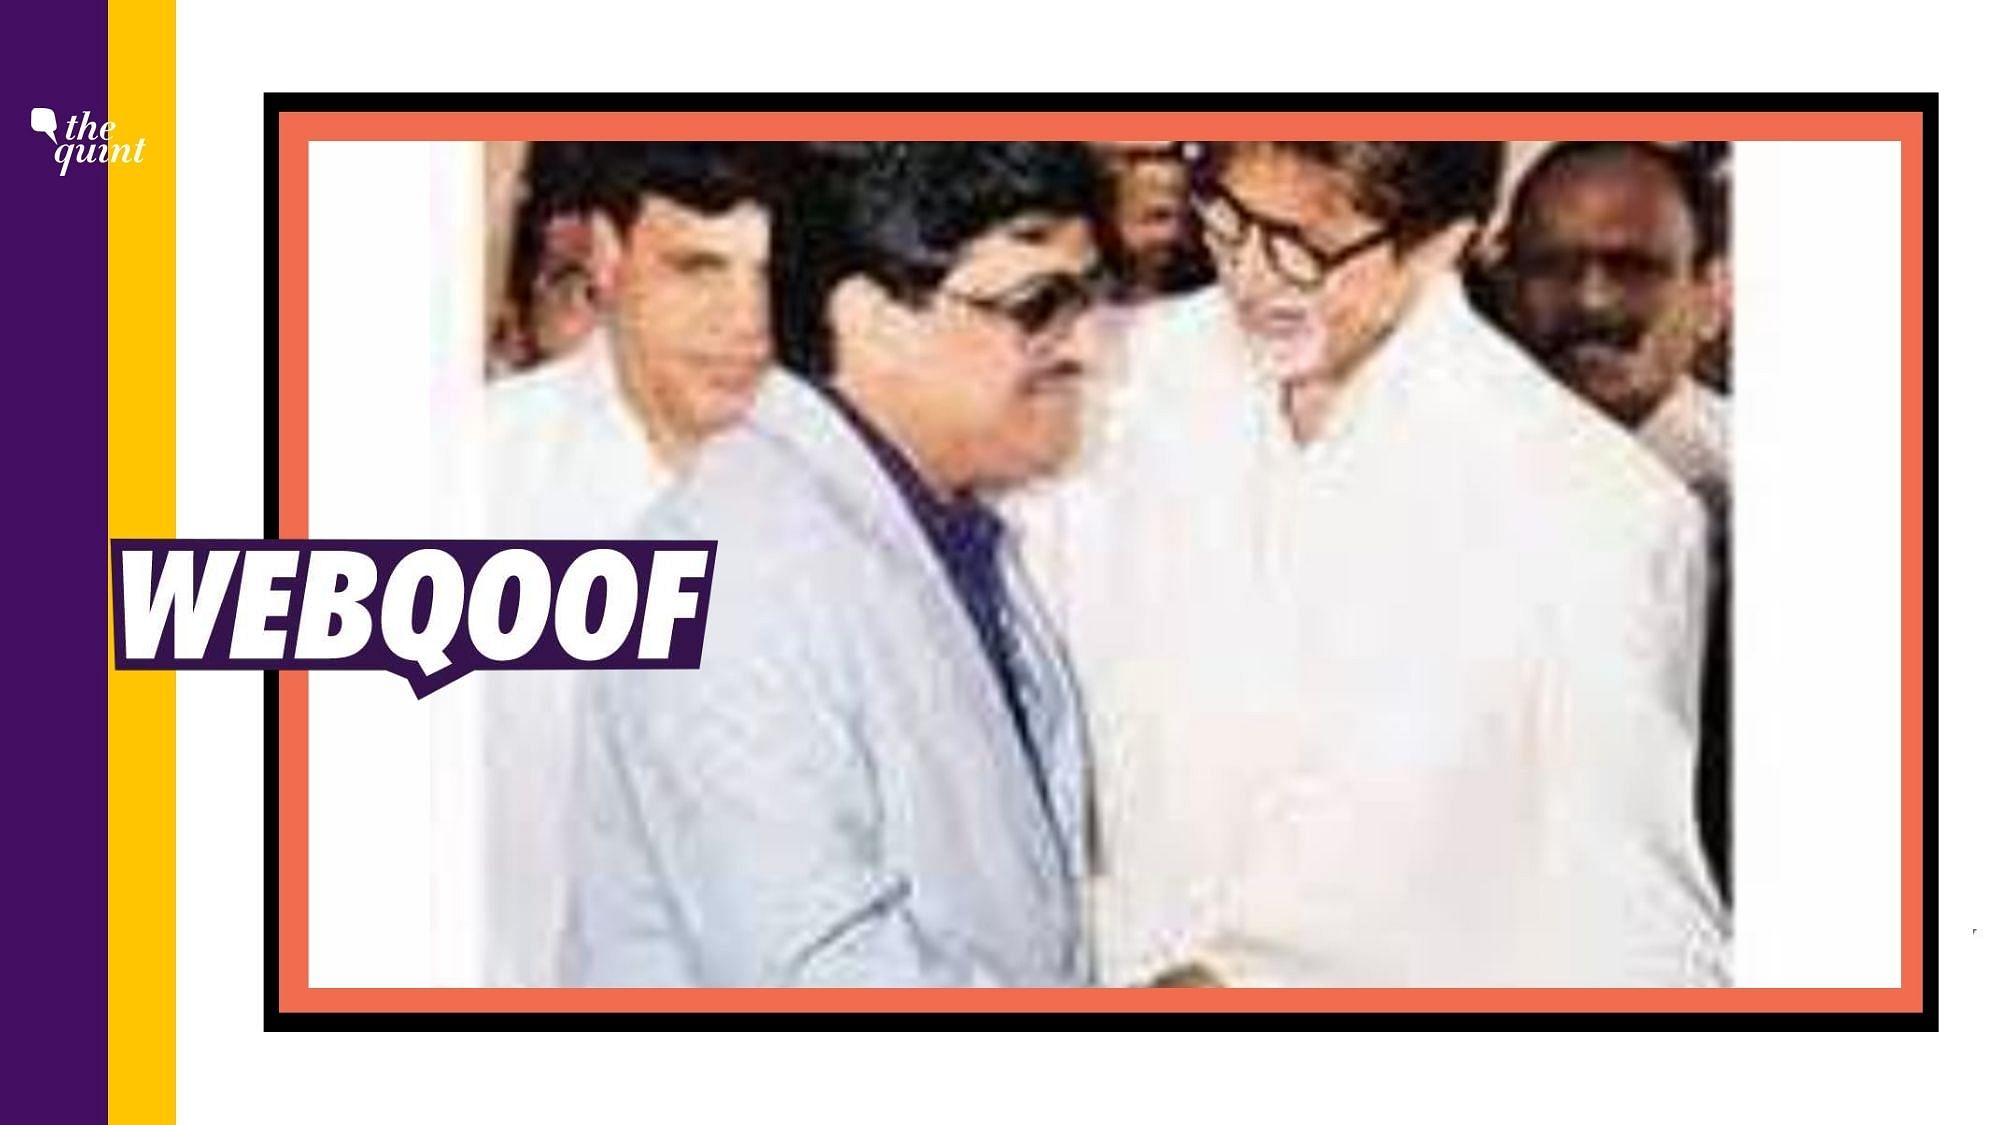 The photograph is nearly a decade old when Amitabh Bachchan met then Chief Minister of Maharashtra Ashok Chavan.